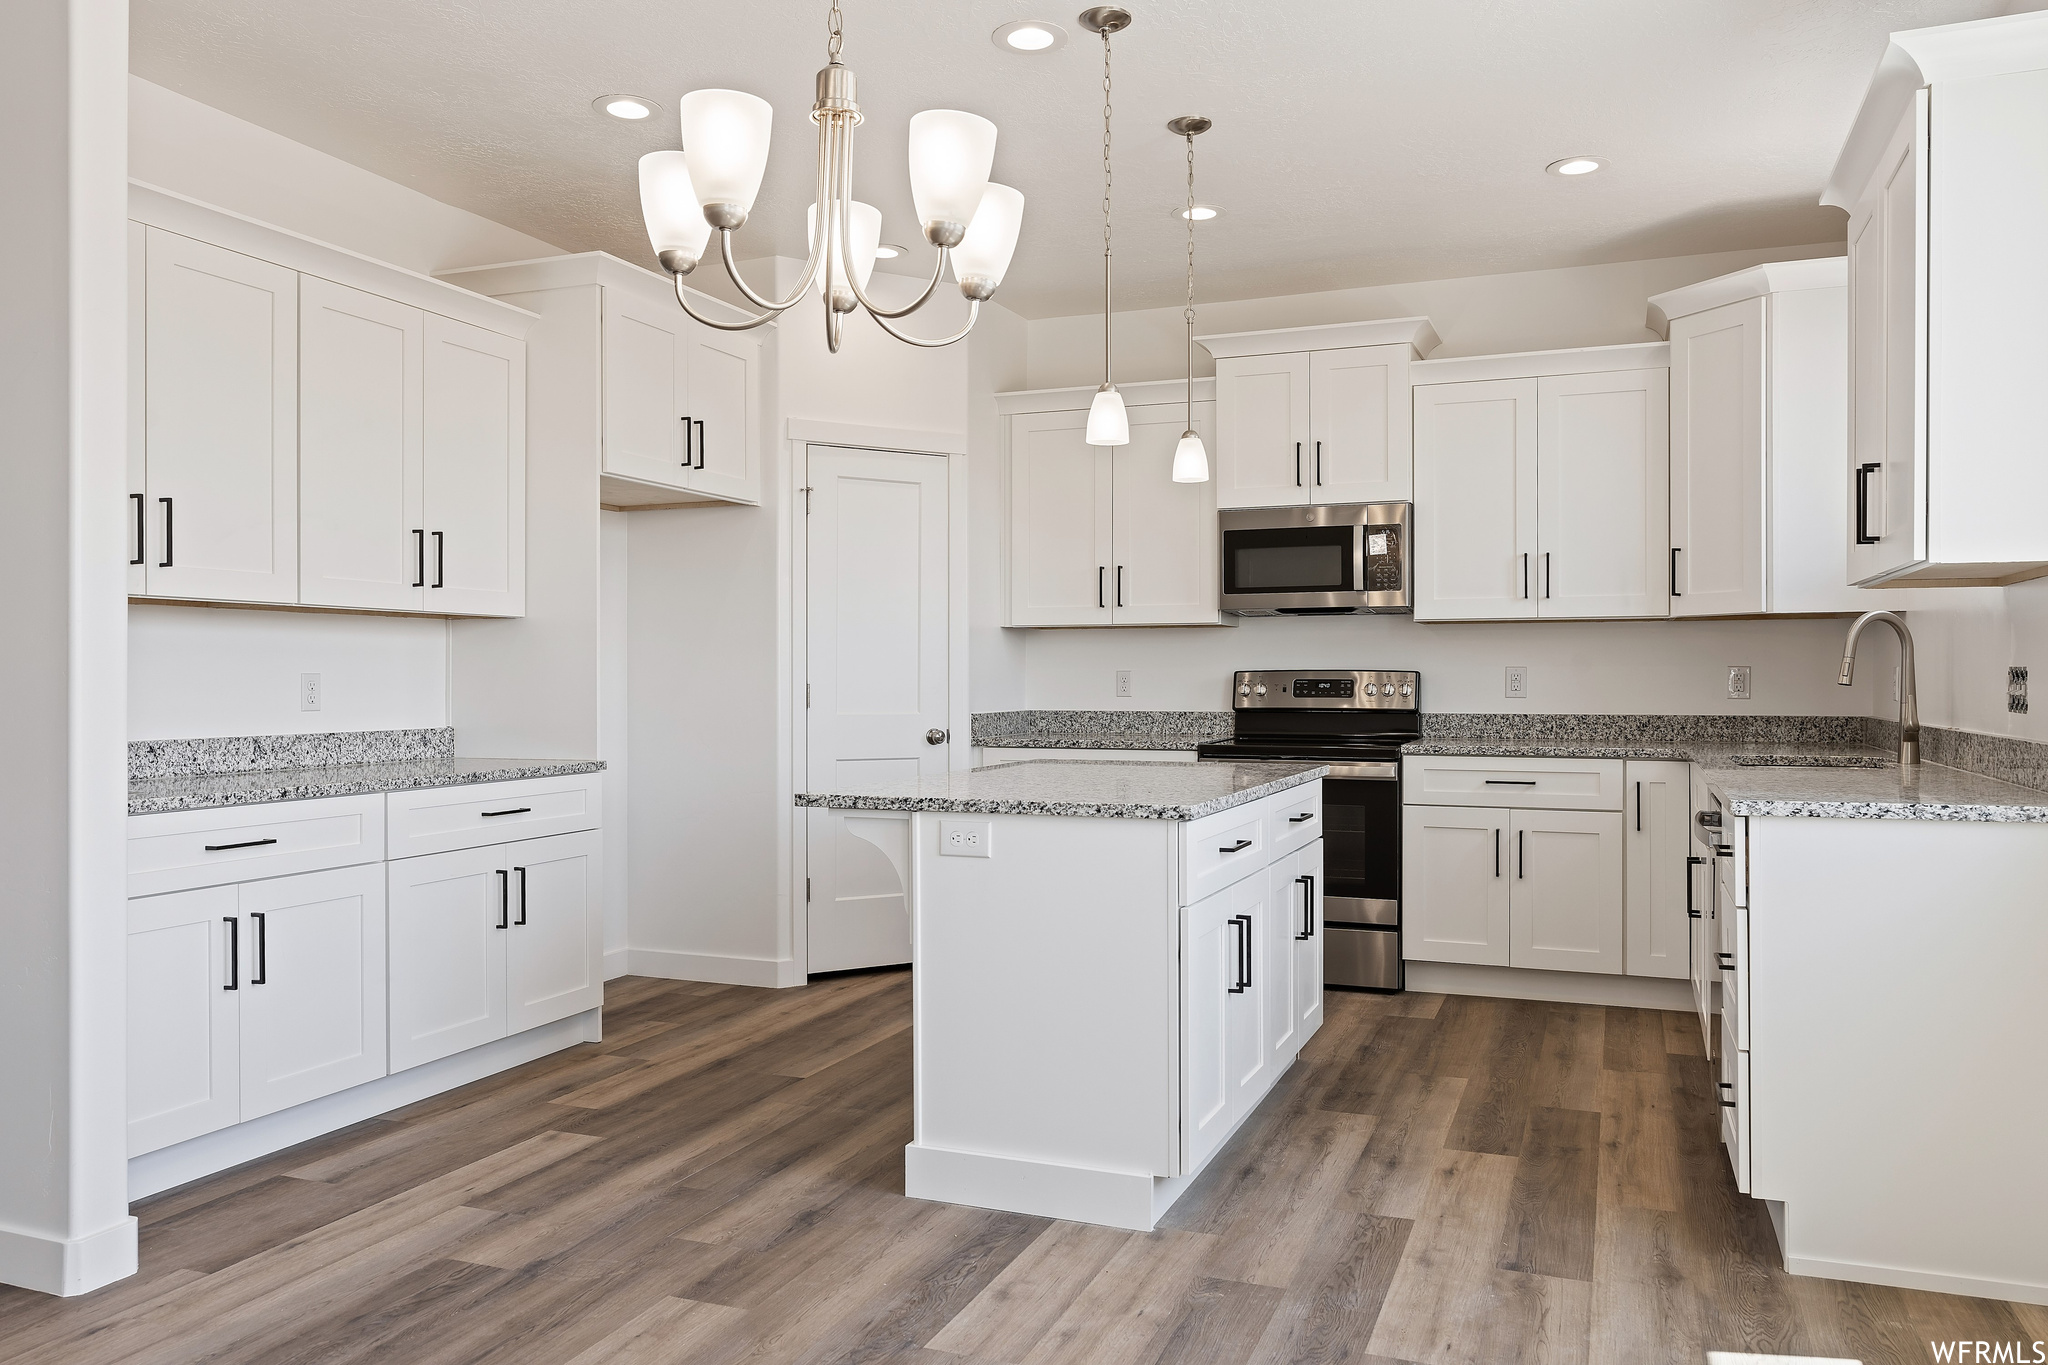 Kitchen with white cabinetry, pendant lighting, dark hardwood flooring, a chandelier, light stone countertops, and appliances with stainless steel finishes